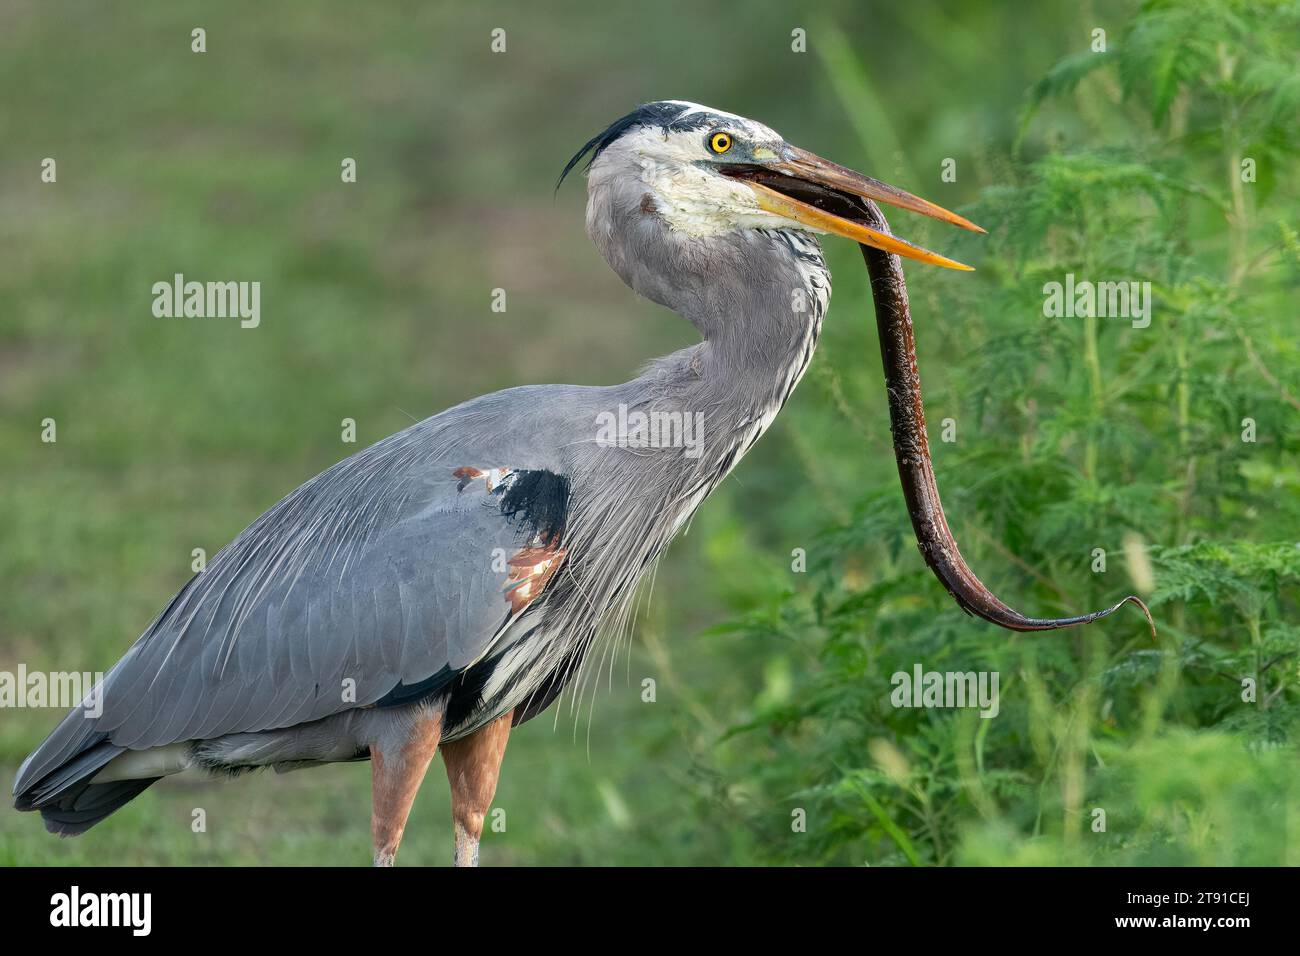 A great blue heron eating a swamp eel. Stock Photo